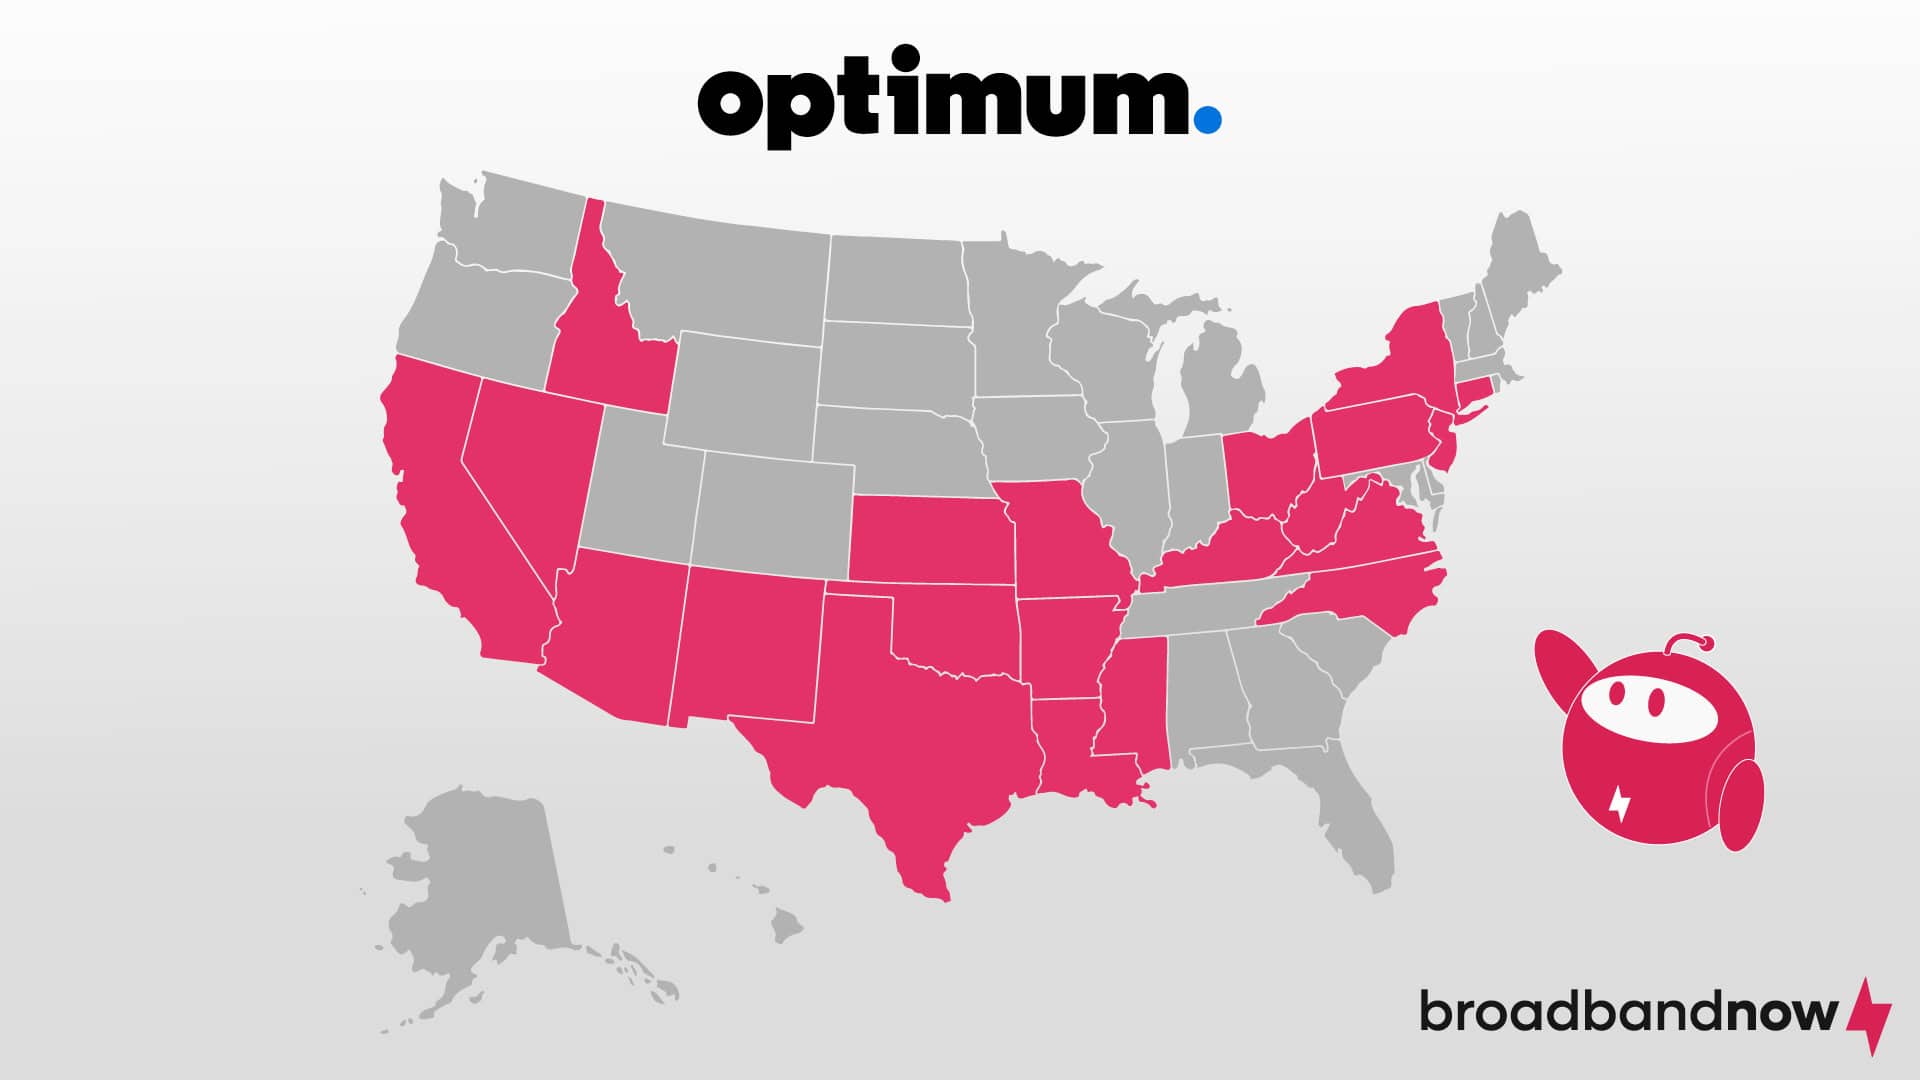 A map showing Optimum’s coverage in the United States.